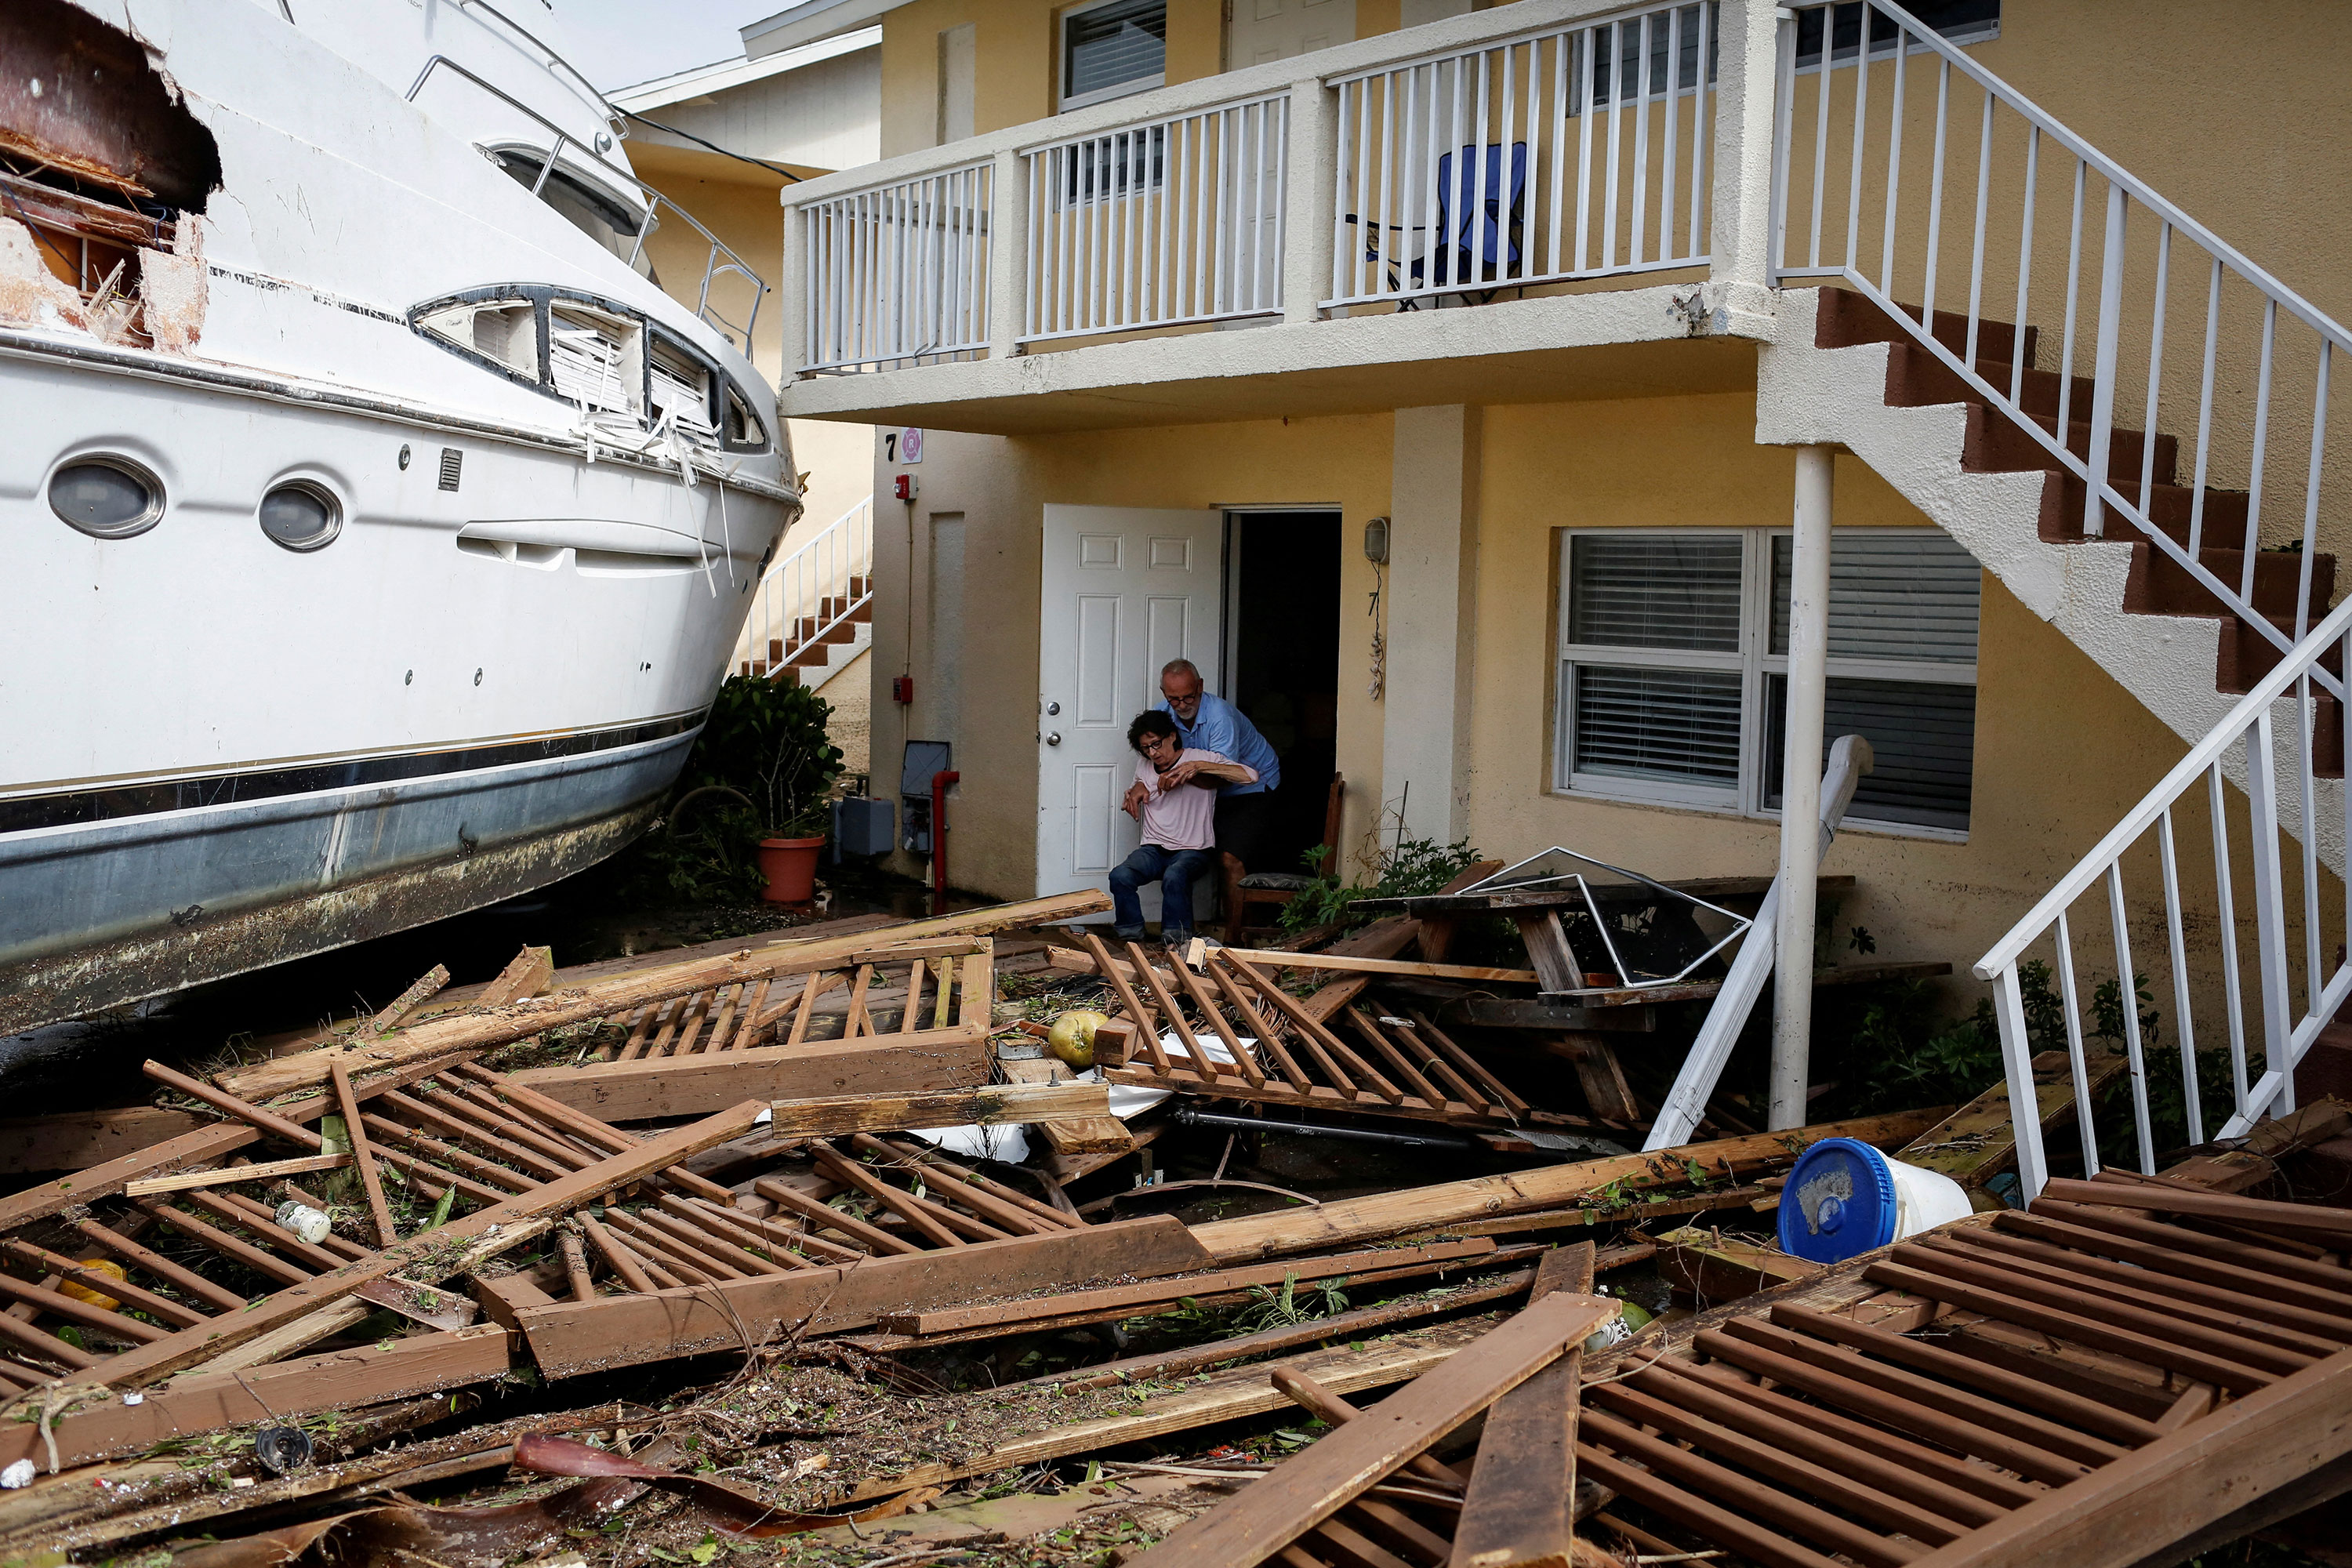 A man helps a woman among debris at a downtown condominium in Fort Myers, Florida, on Thursday.